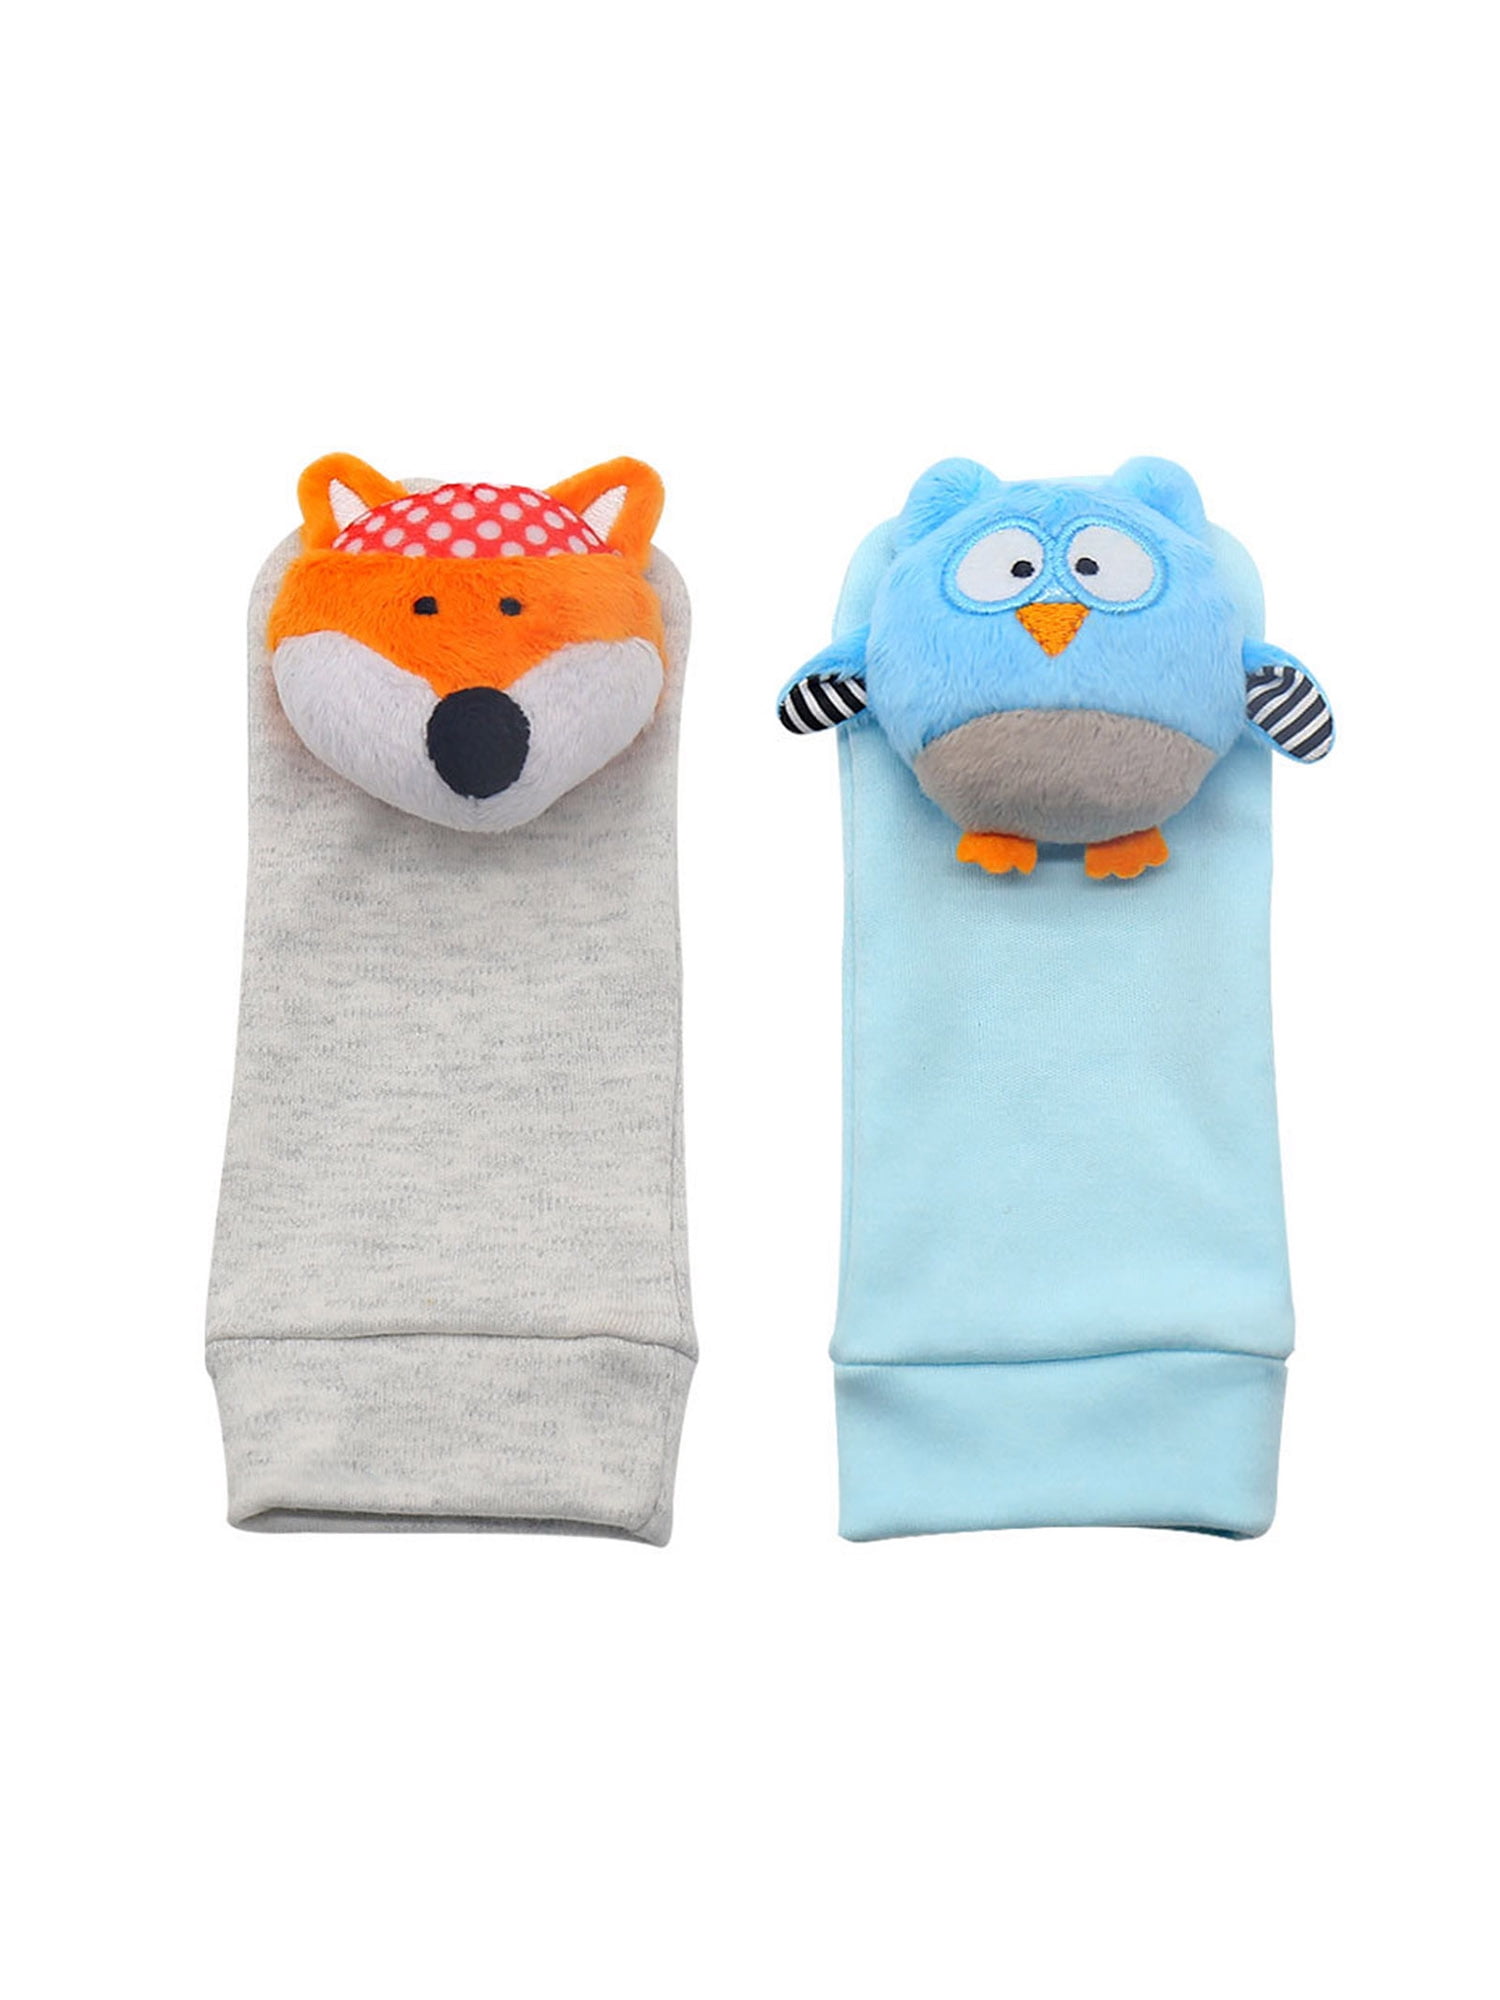 0-2 Yrs Old Wri Rattles Caoon Animal Pattern Rattle Wri Bands Toy for 02 Yrs Old Baby Newborn Infant Girl Boys Oyunngs 【 】 Soft Baby Socks Toys 